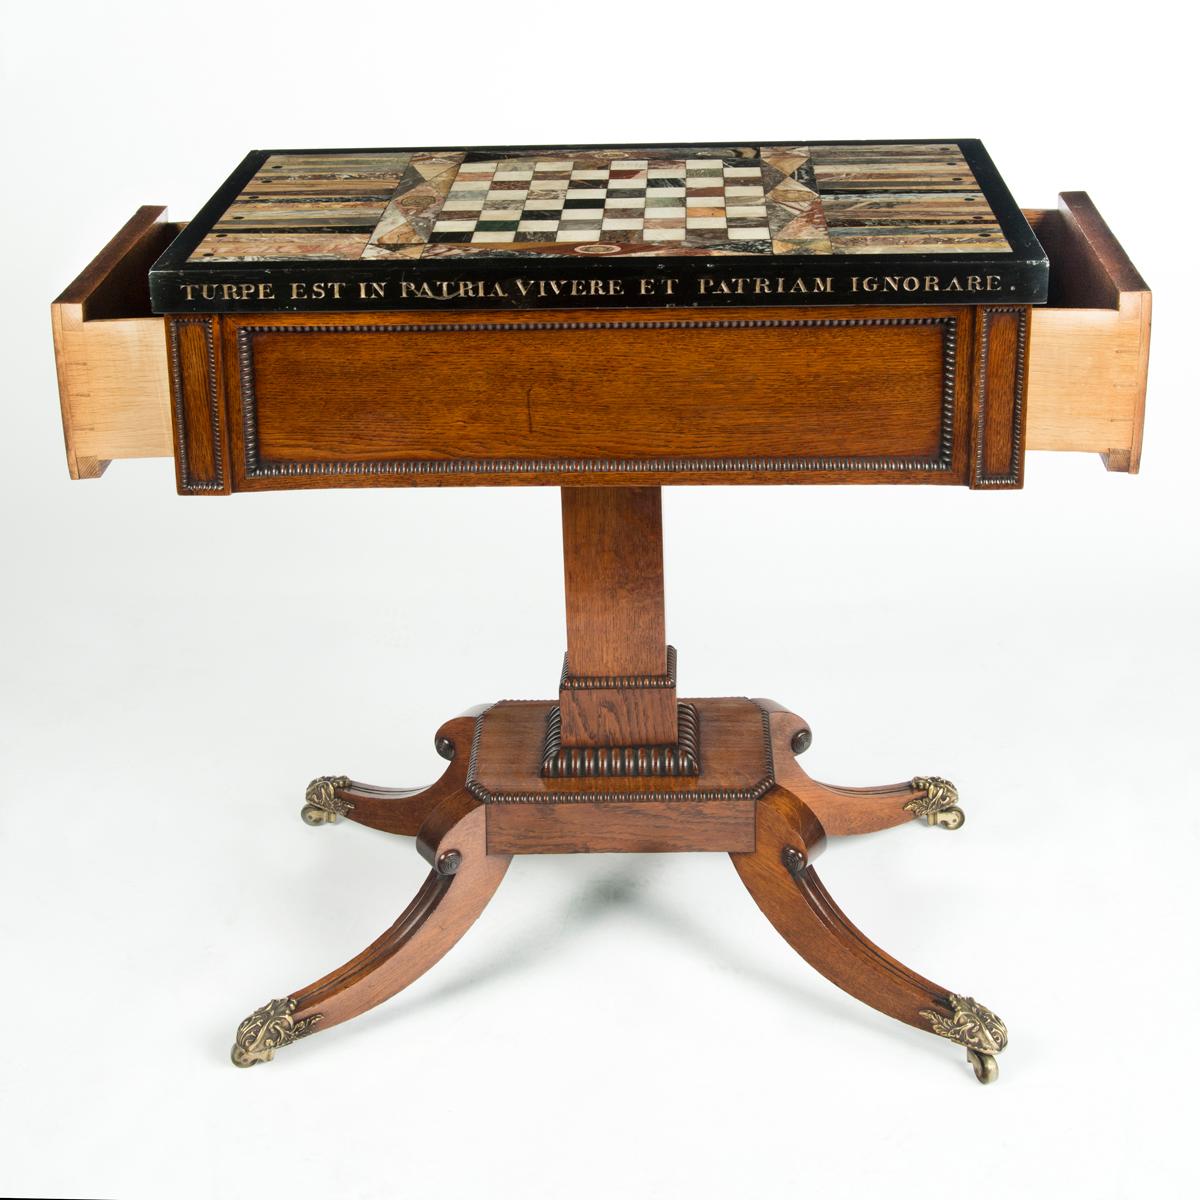 An unusual George IV specimen marble backgammon table attributed to Gillows. This rectangular table is strongly attributed to Gillows.  It has a rectangular top inlaid with a central chess board flanked by two backgammon fields, all inlaid with a